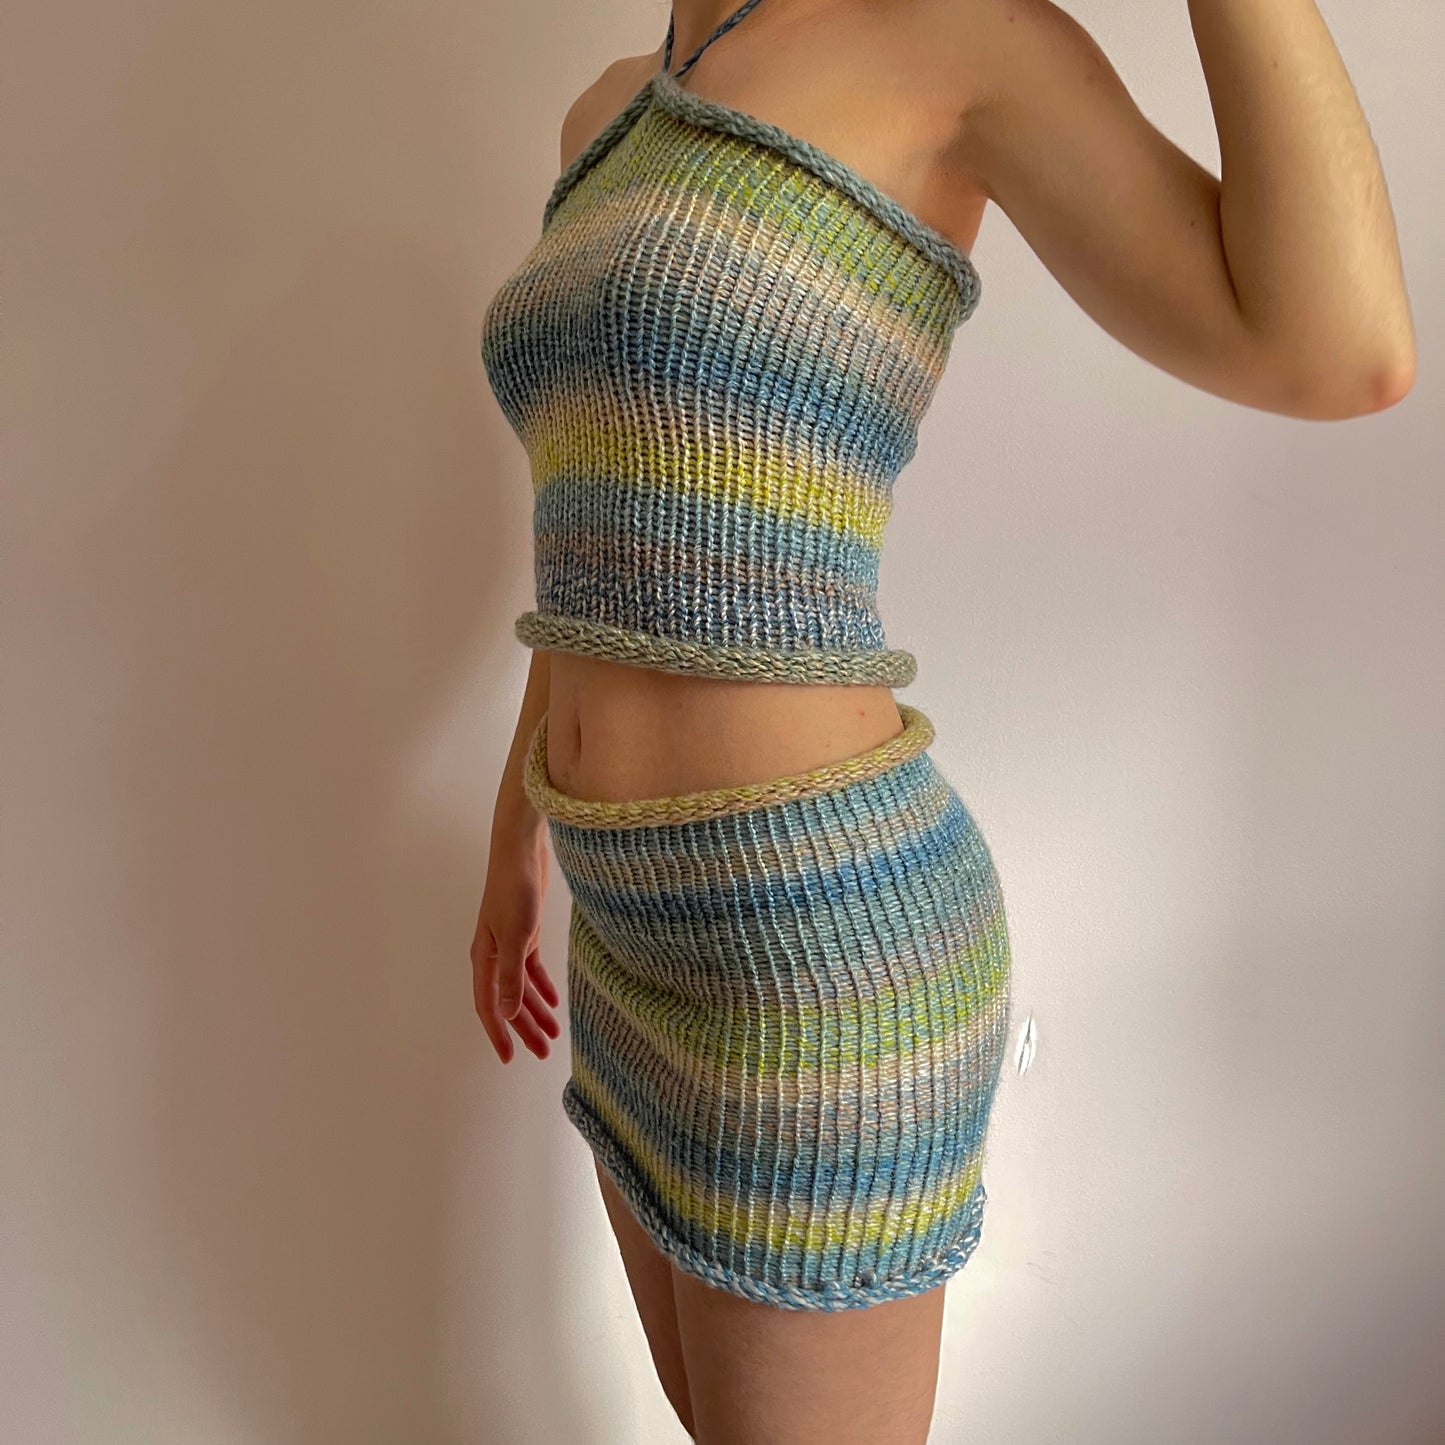 Handmade knitted mini skirt in green, beige, yellow and blue